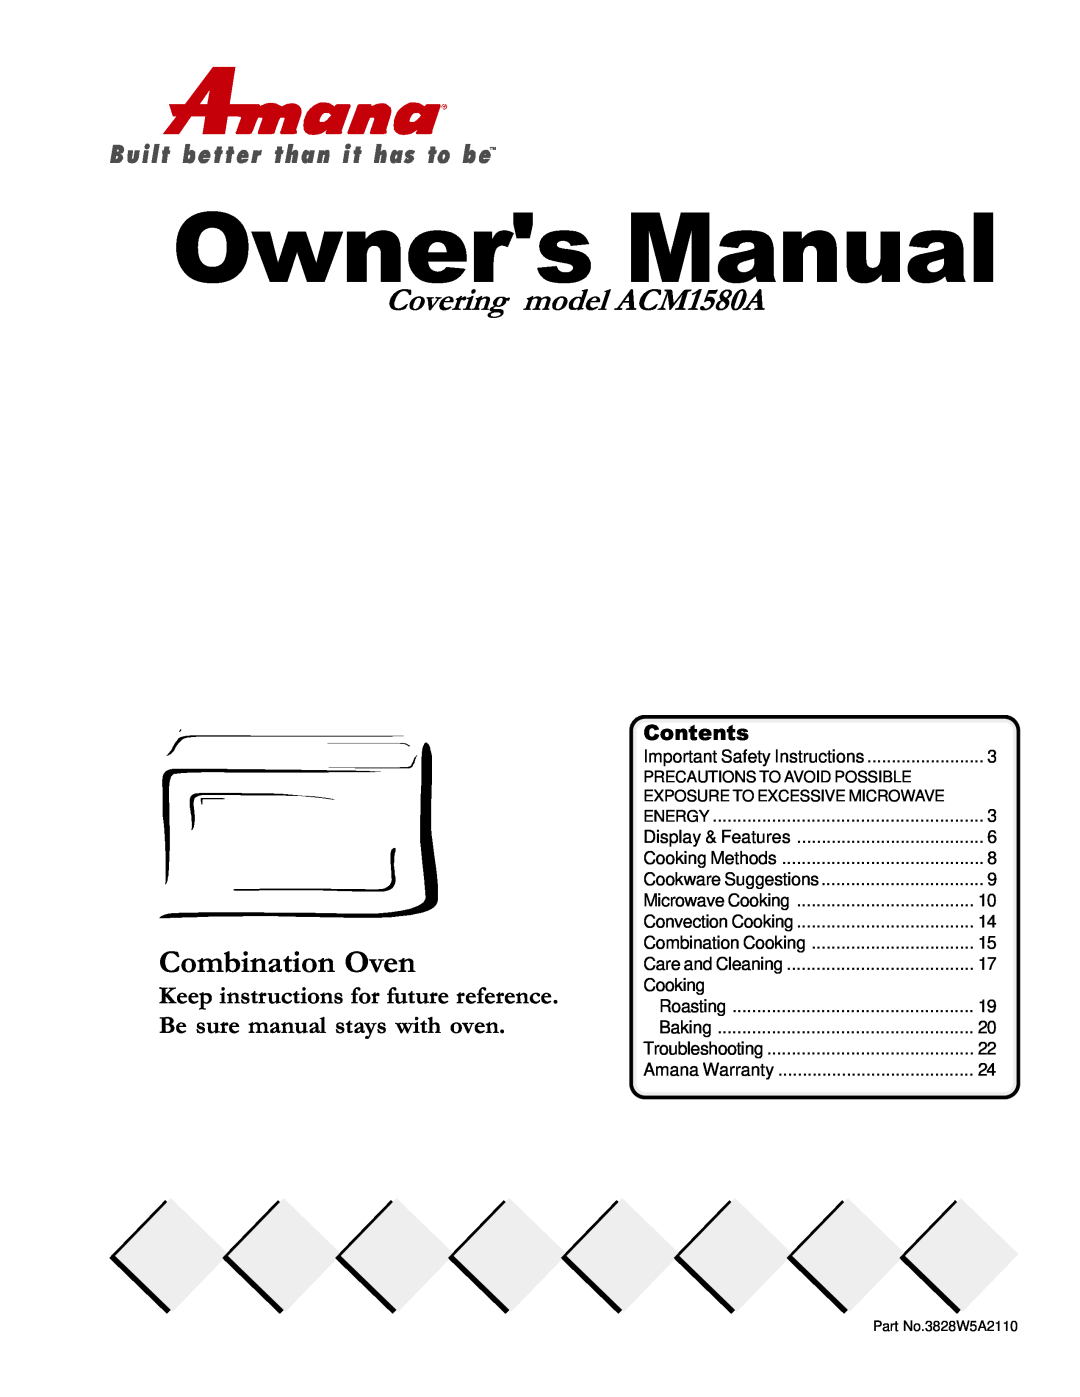 Amana owner manual Covering model ACM1580A, Combination Oven, Contents 